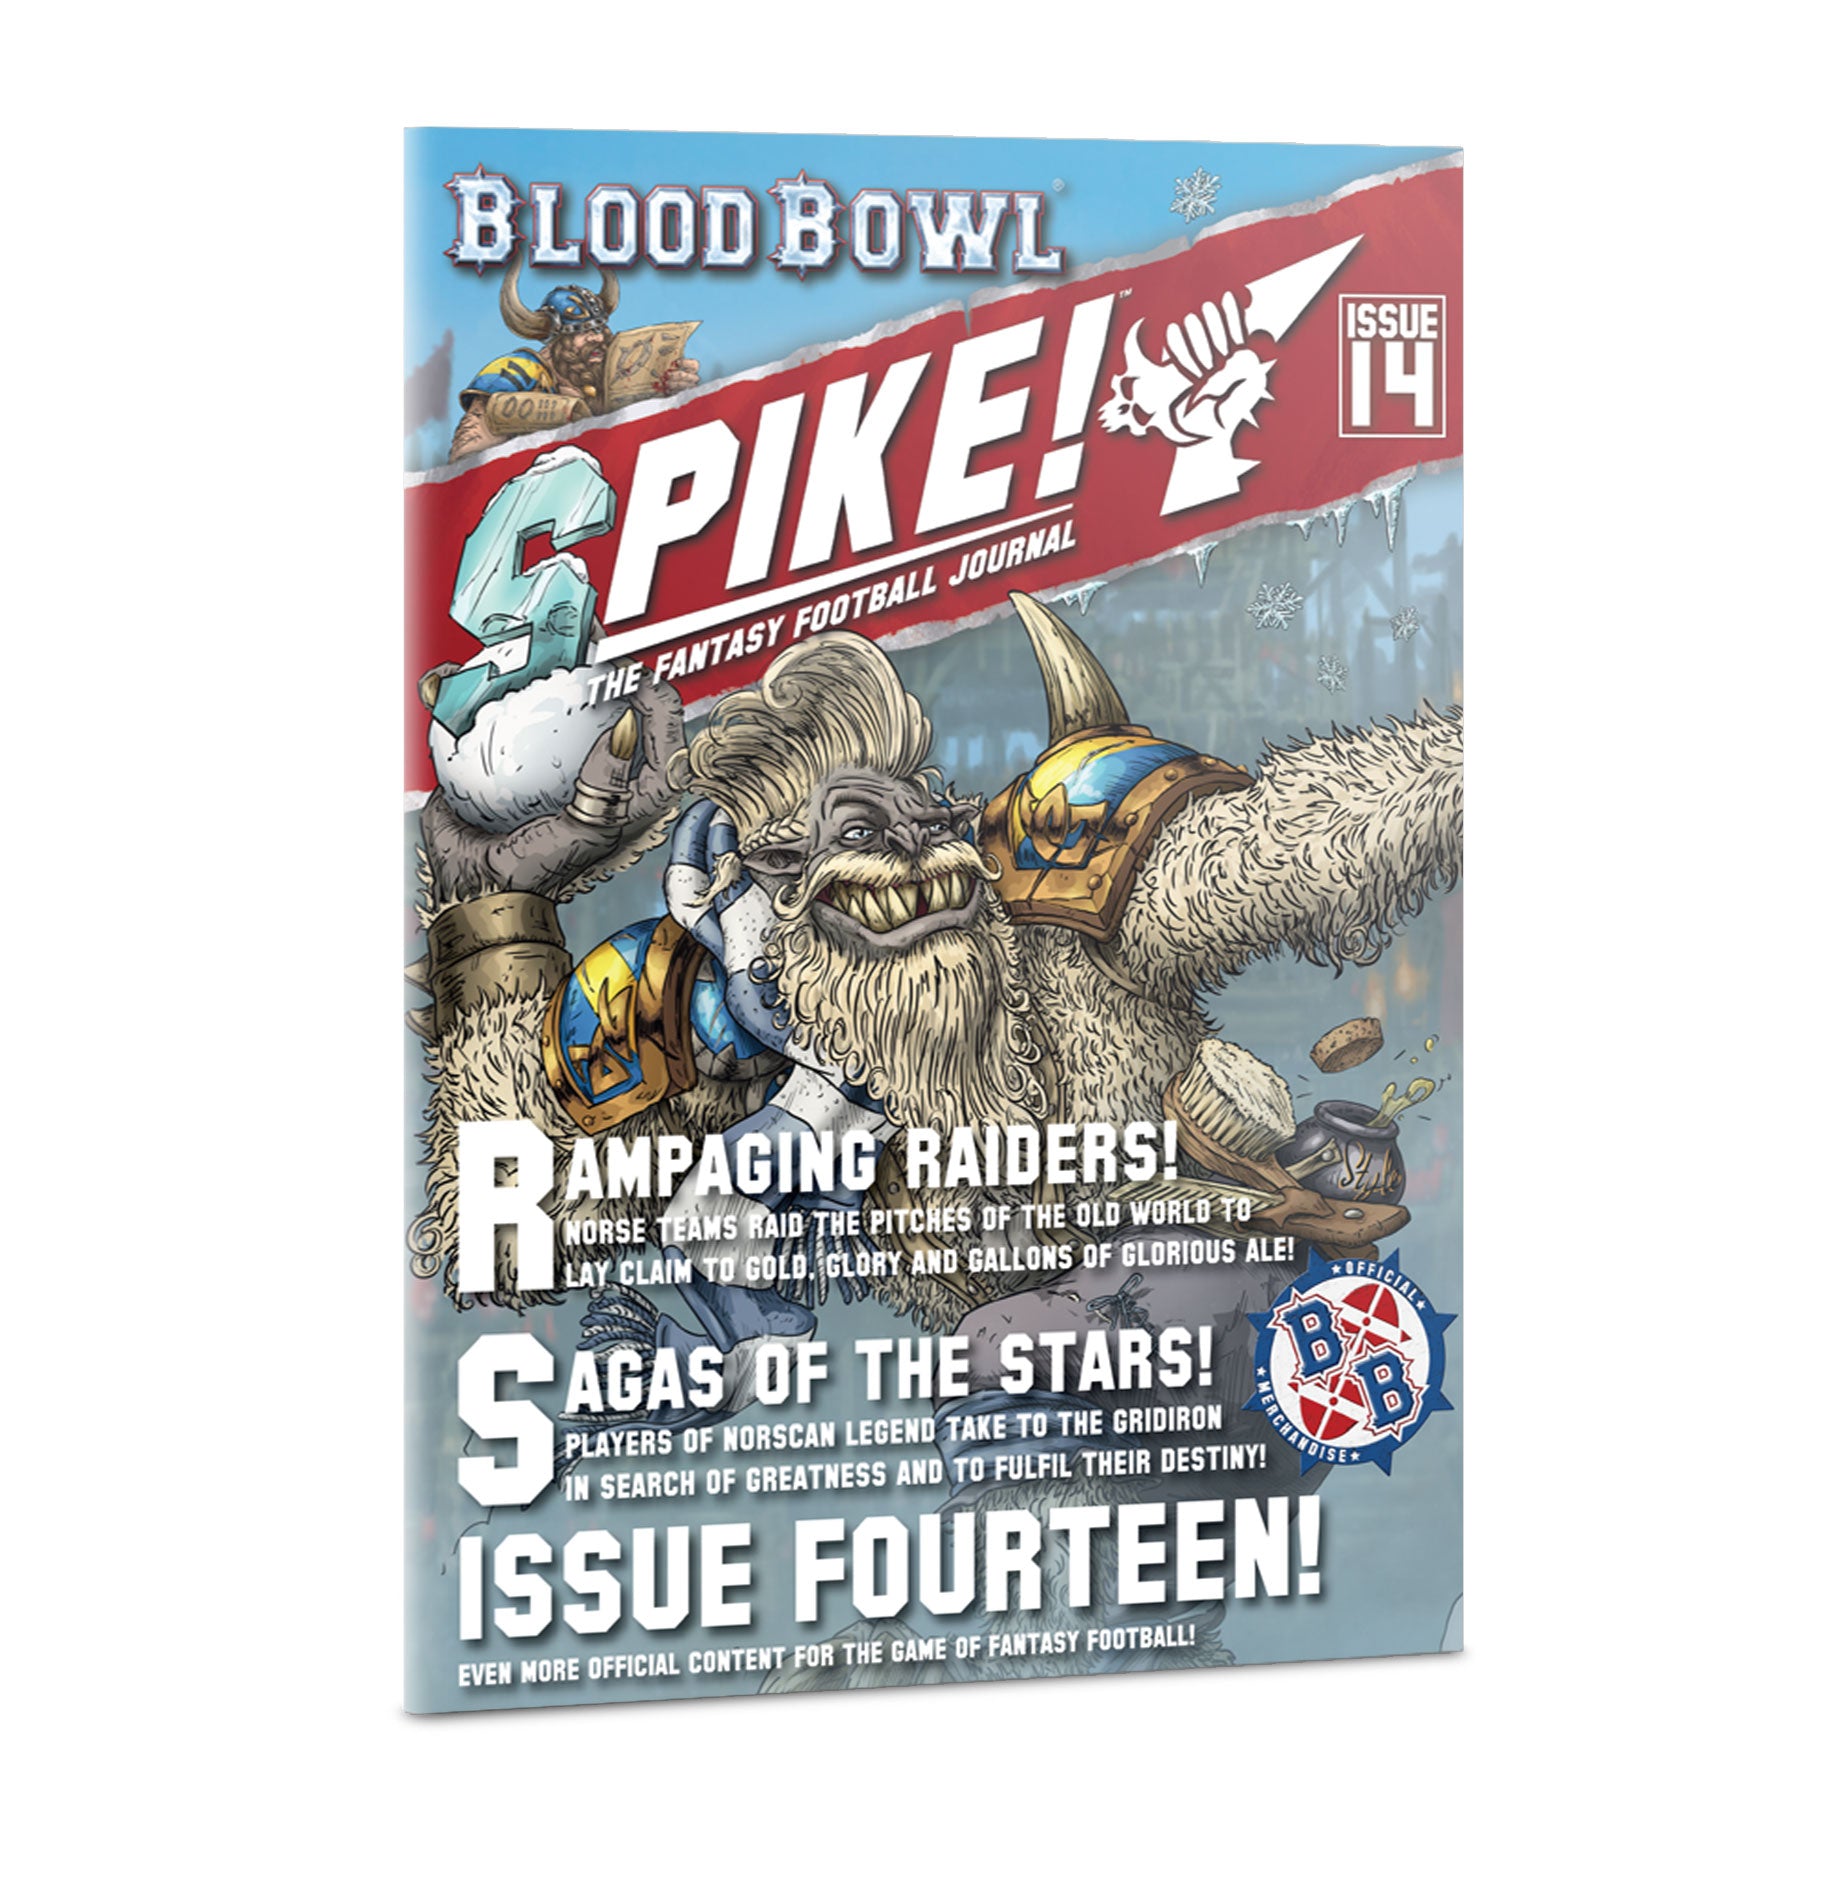 BLOOD BOWL: SPIKE JOURNAL! ISSUE 14 | BD Cosmos